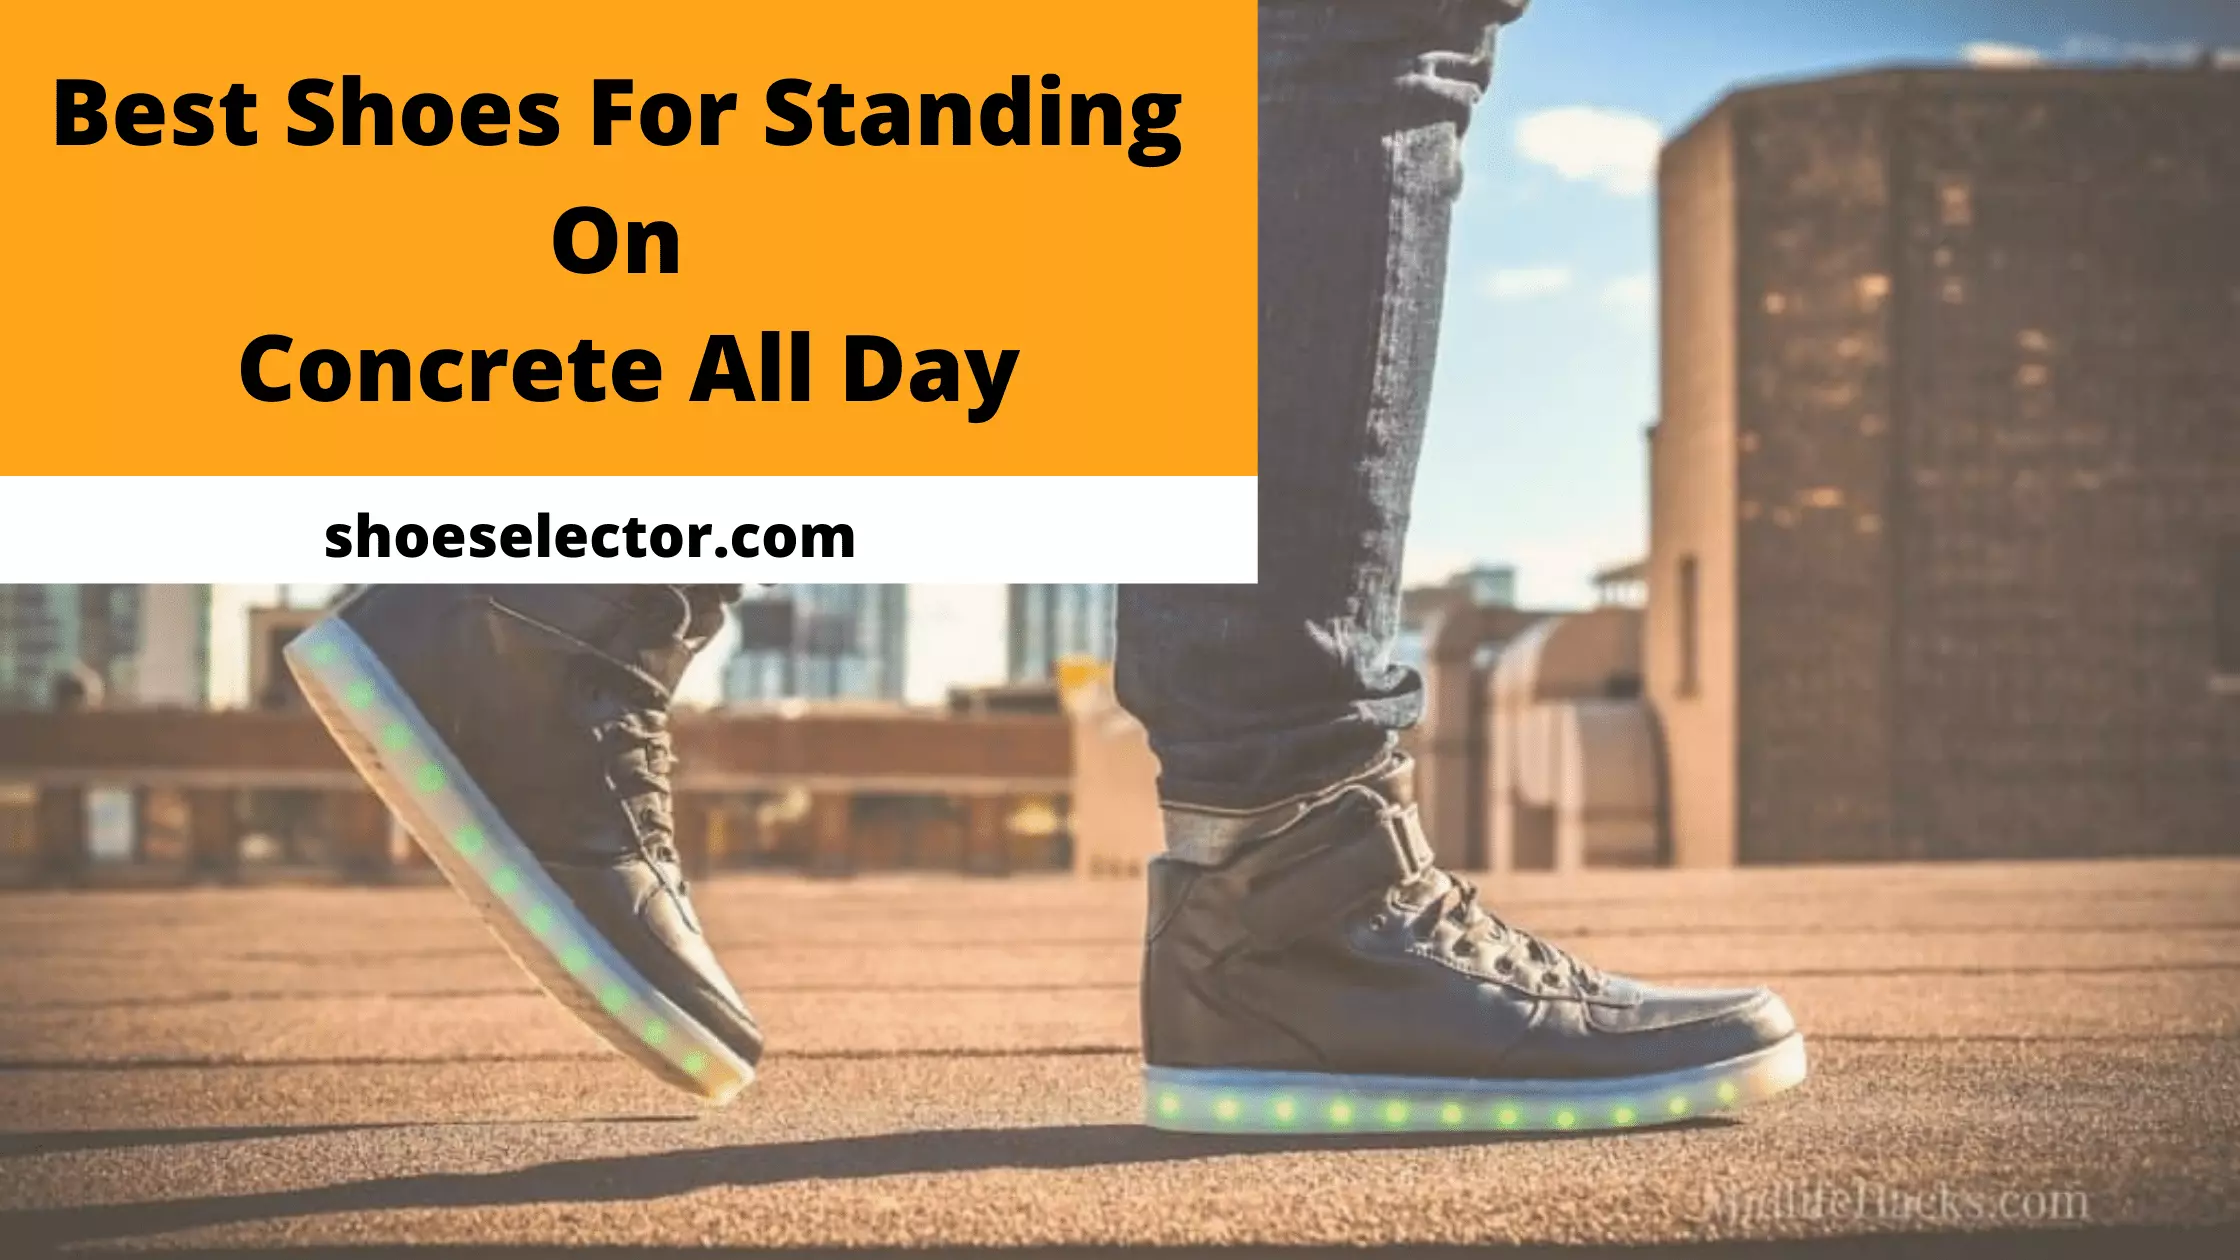 Best Shoes For Standing on Concrete All Day | Complete Guide